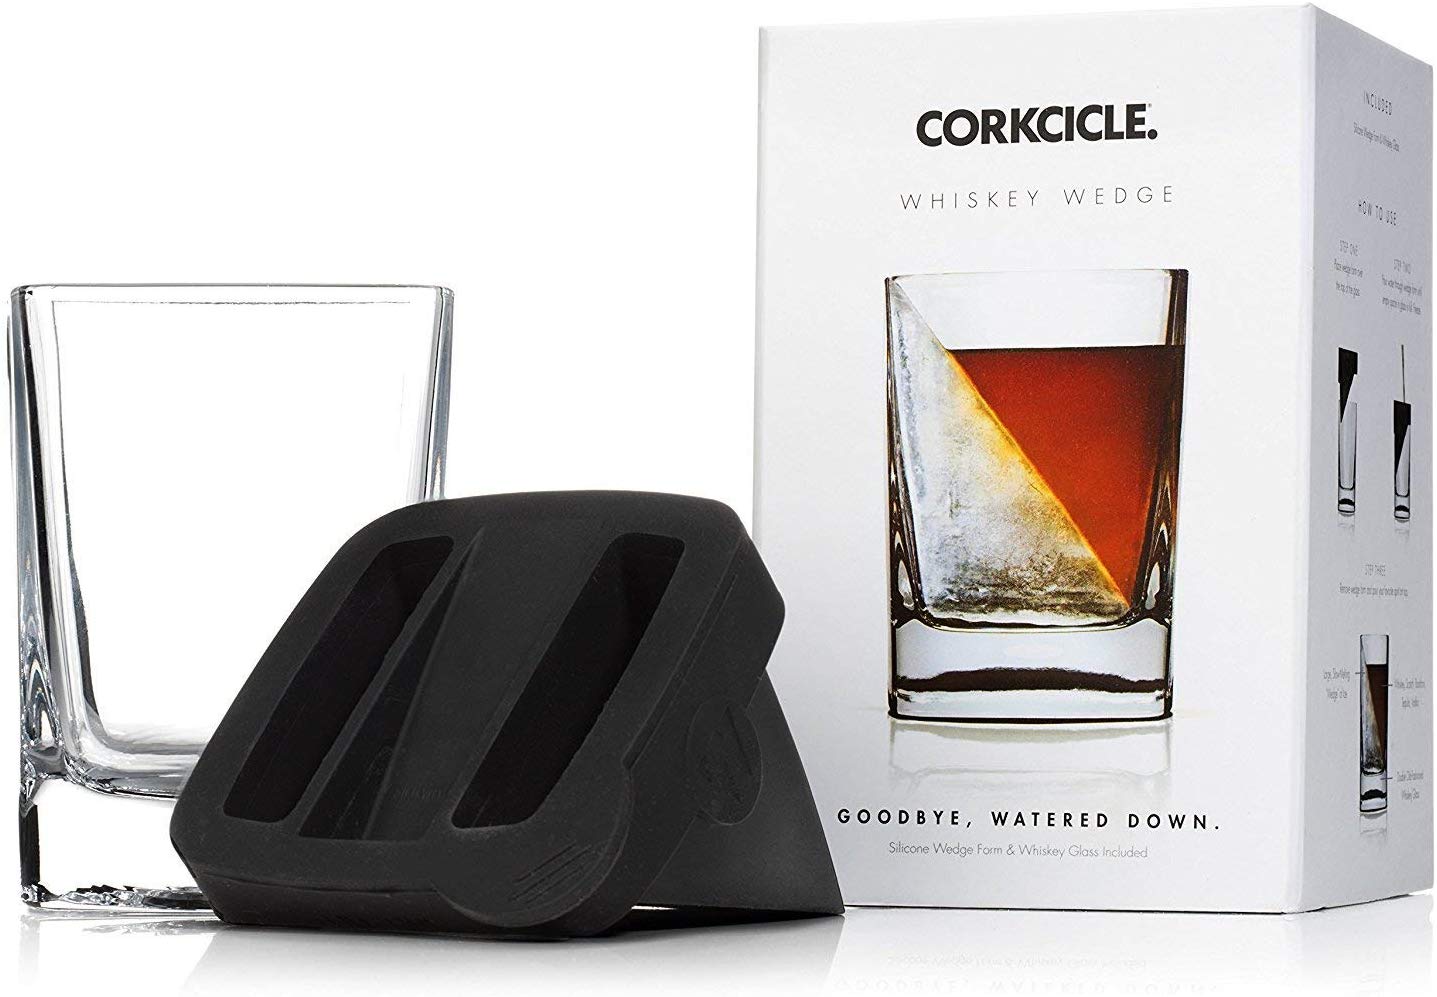 Best Whiskey Gifts 2023: Corkcicle Whiskey Wedge 2023